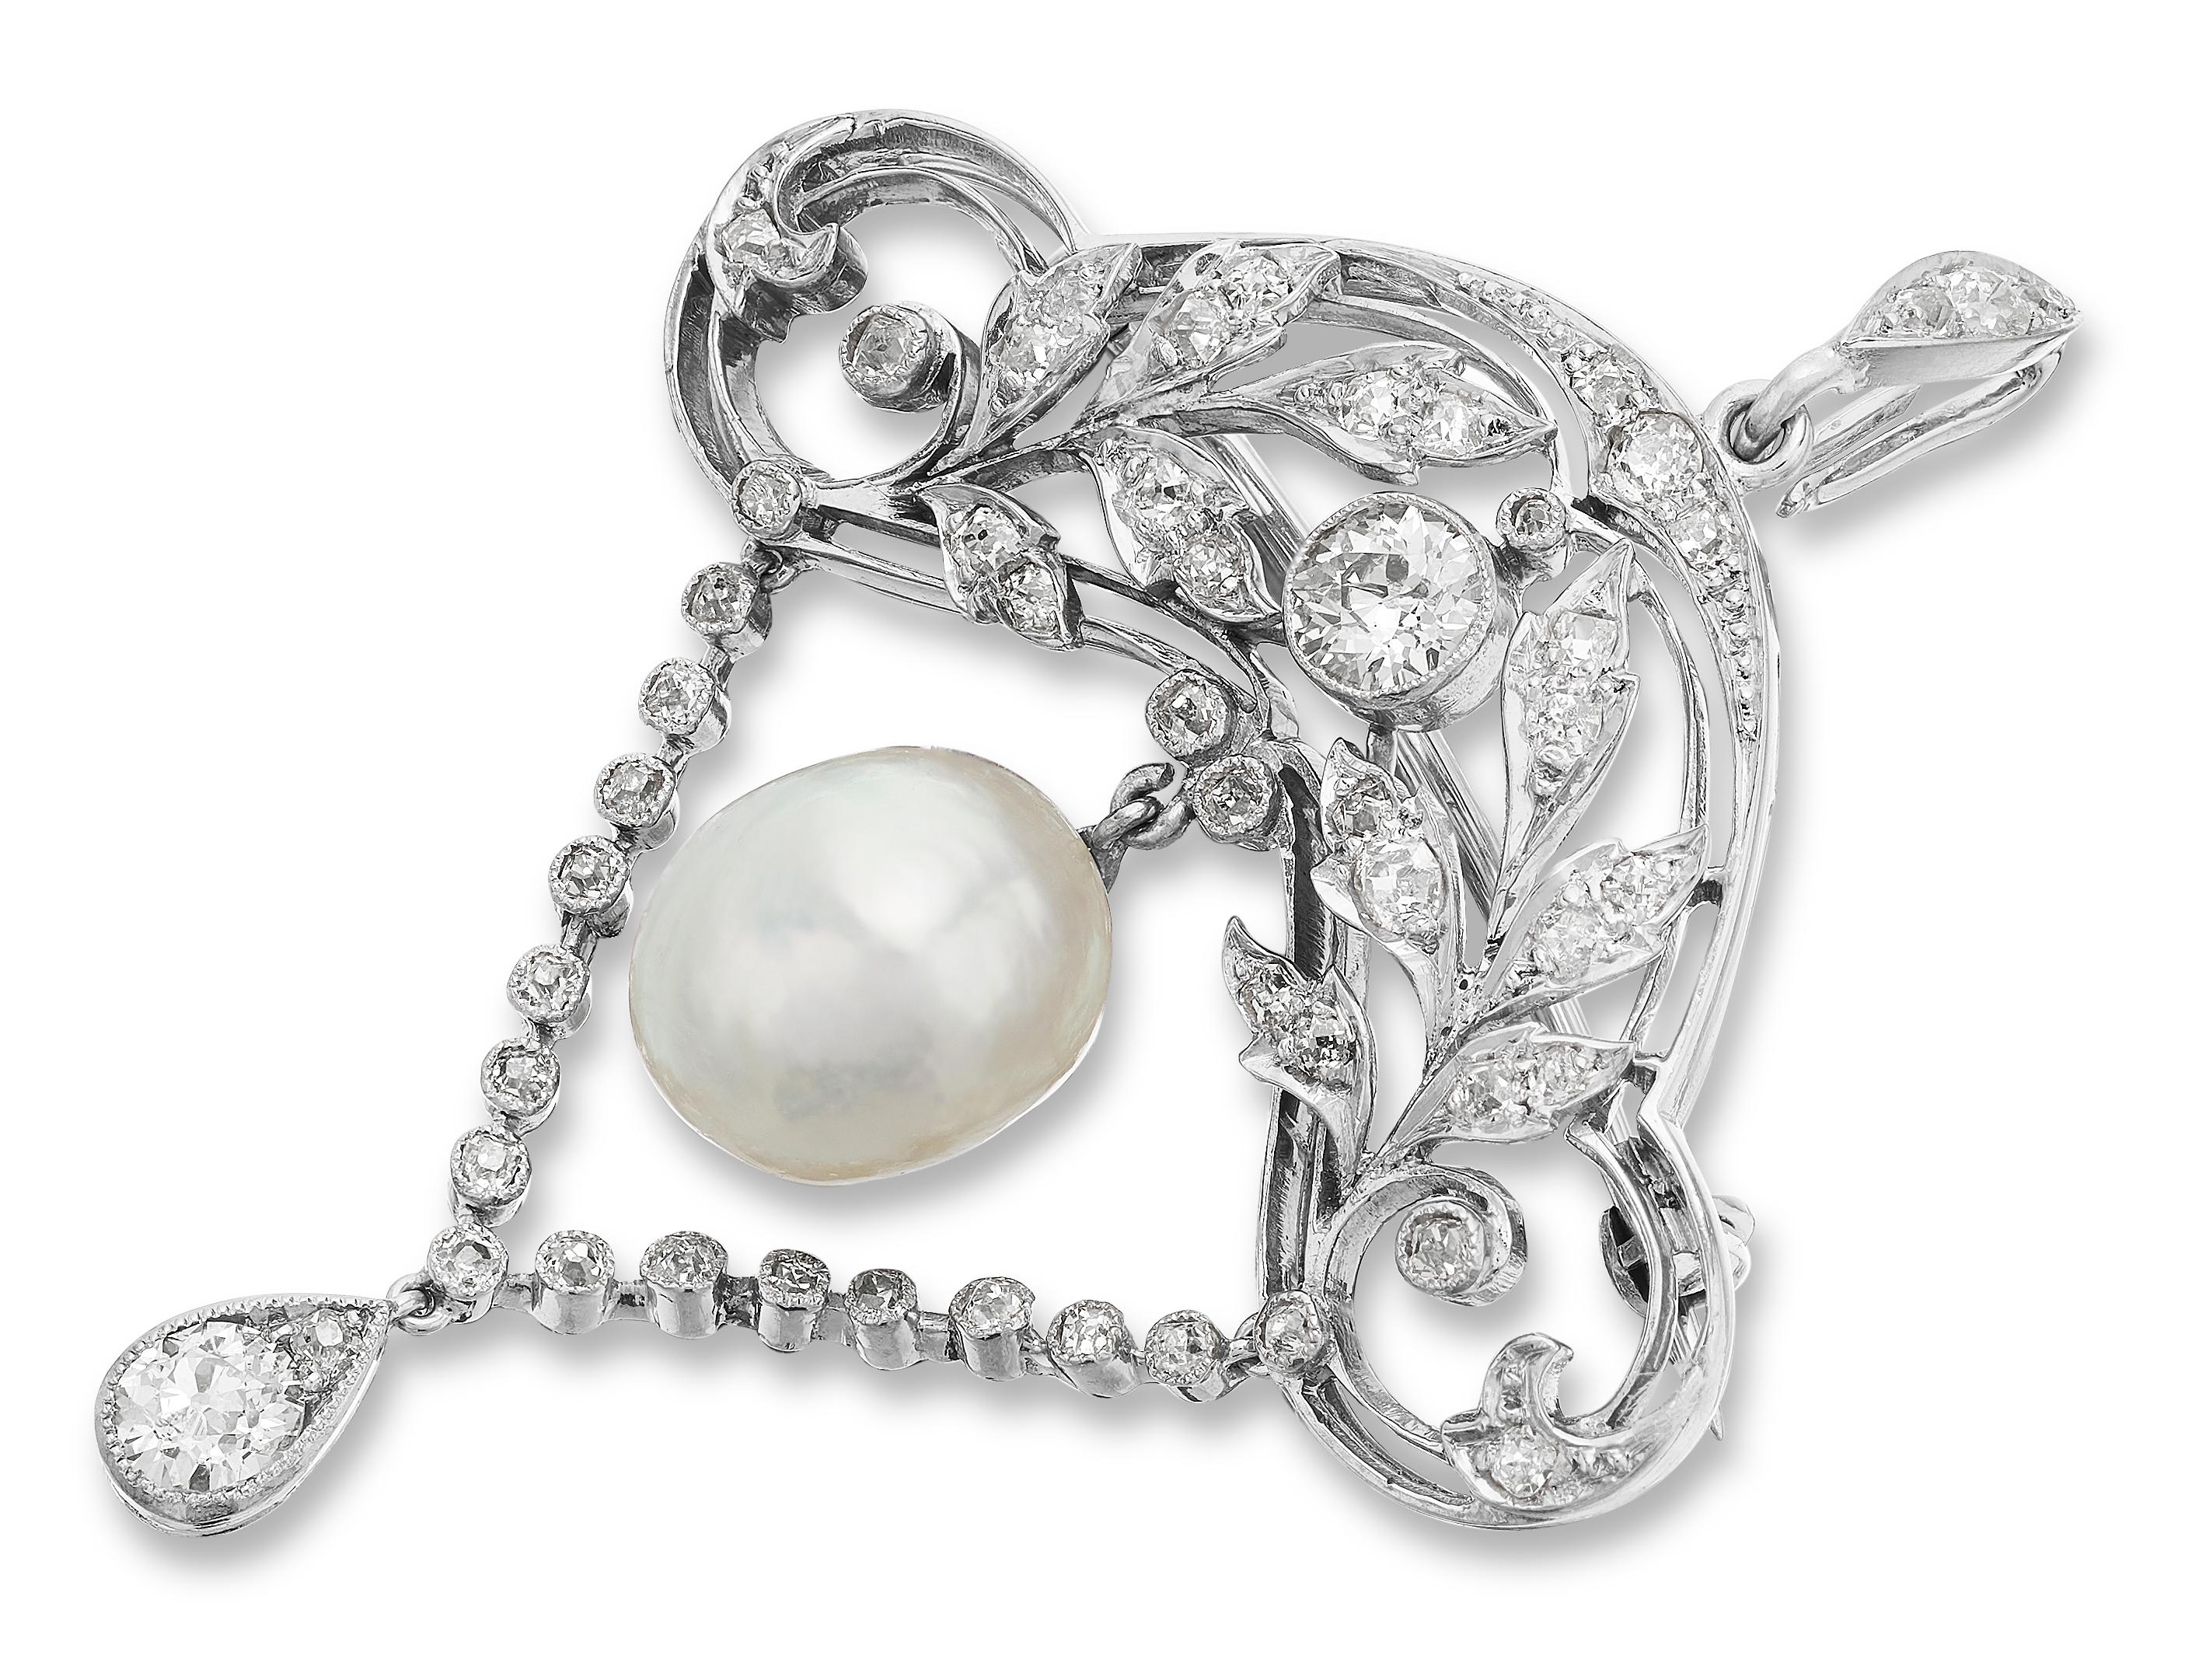 Edwardian Brooch/Pendant. Encrusted with diamonds and natural pearl center set in 18 ct white gold. Today, natural pearls are extremely rare. Only 1 in about 10,000 wild oysters will yield a pearl and of those, only a small percentage achieve the